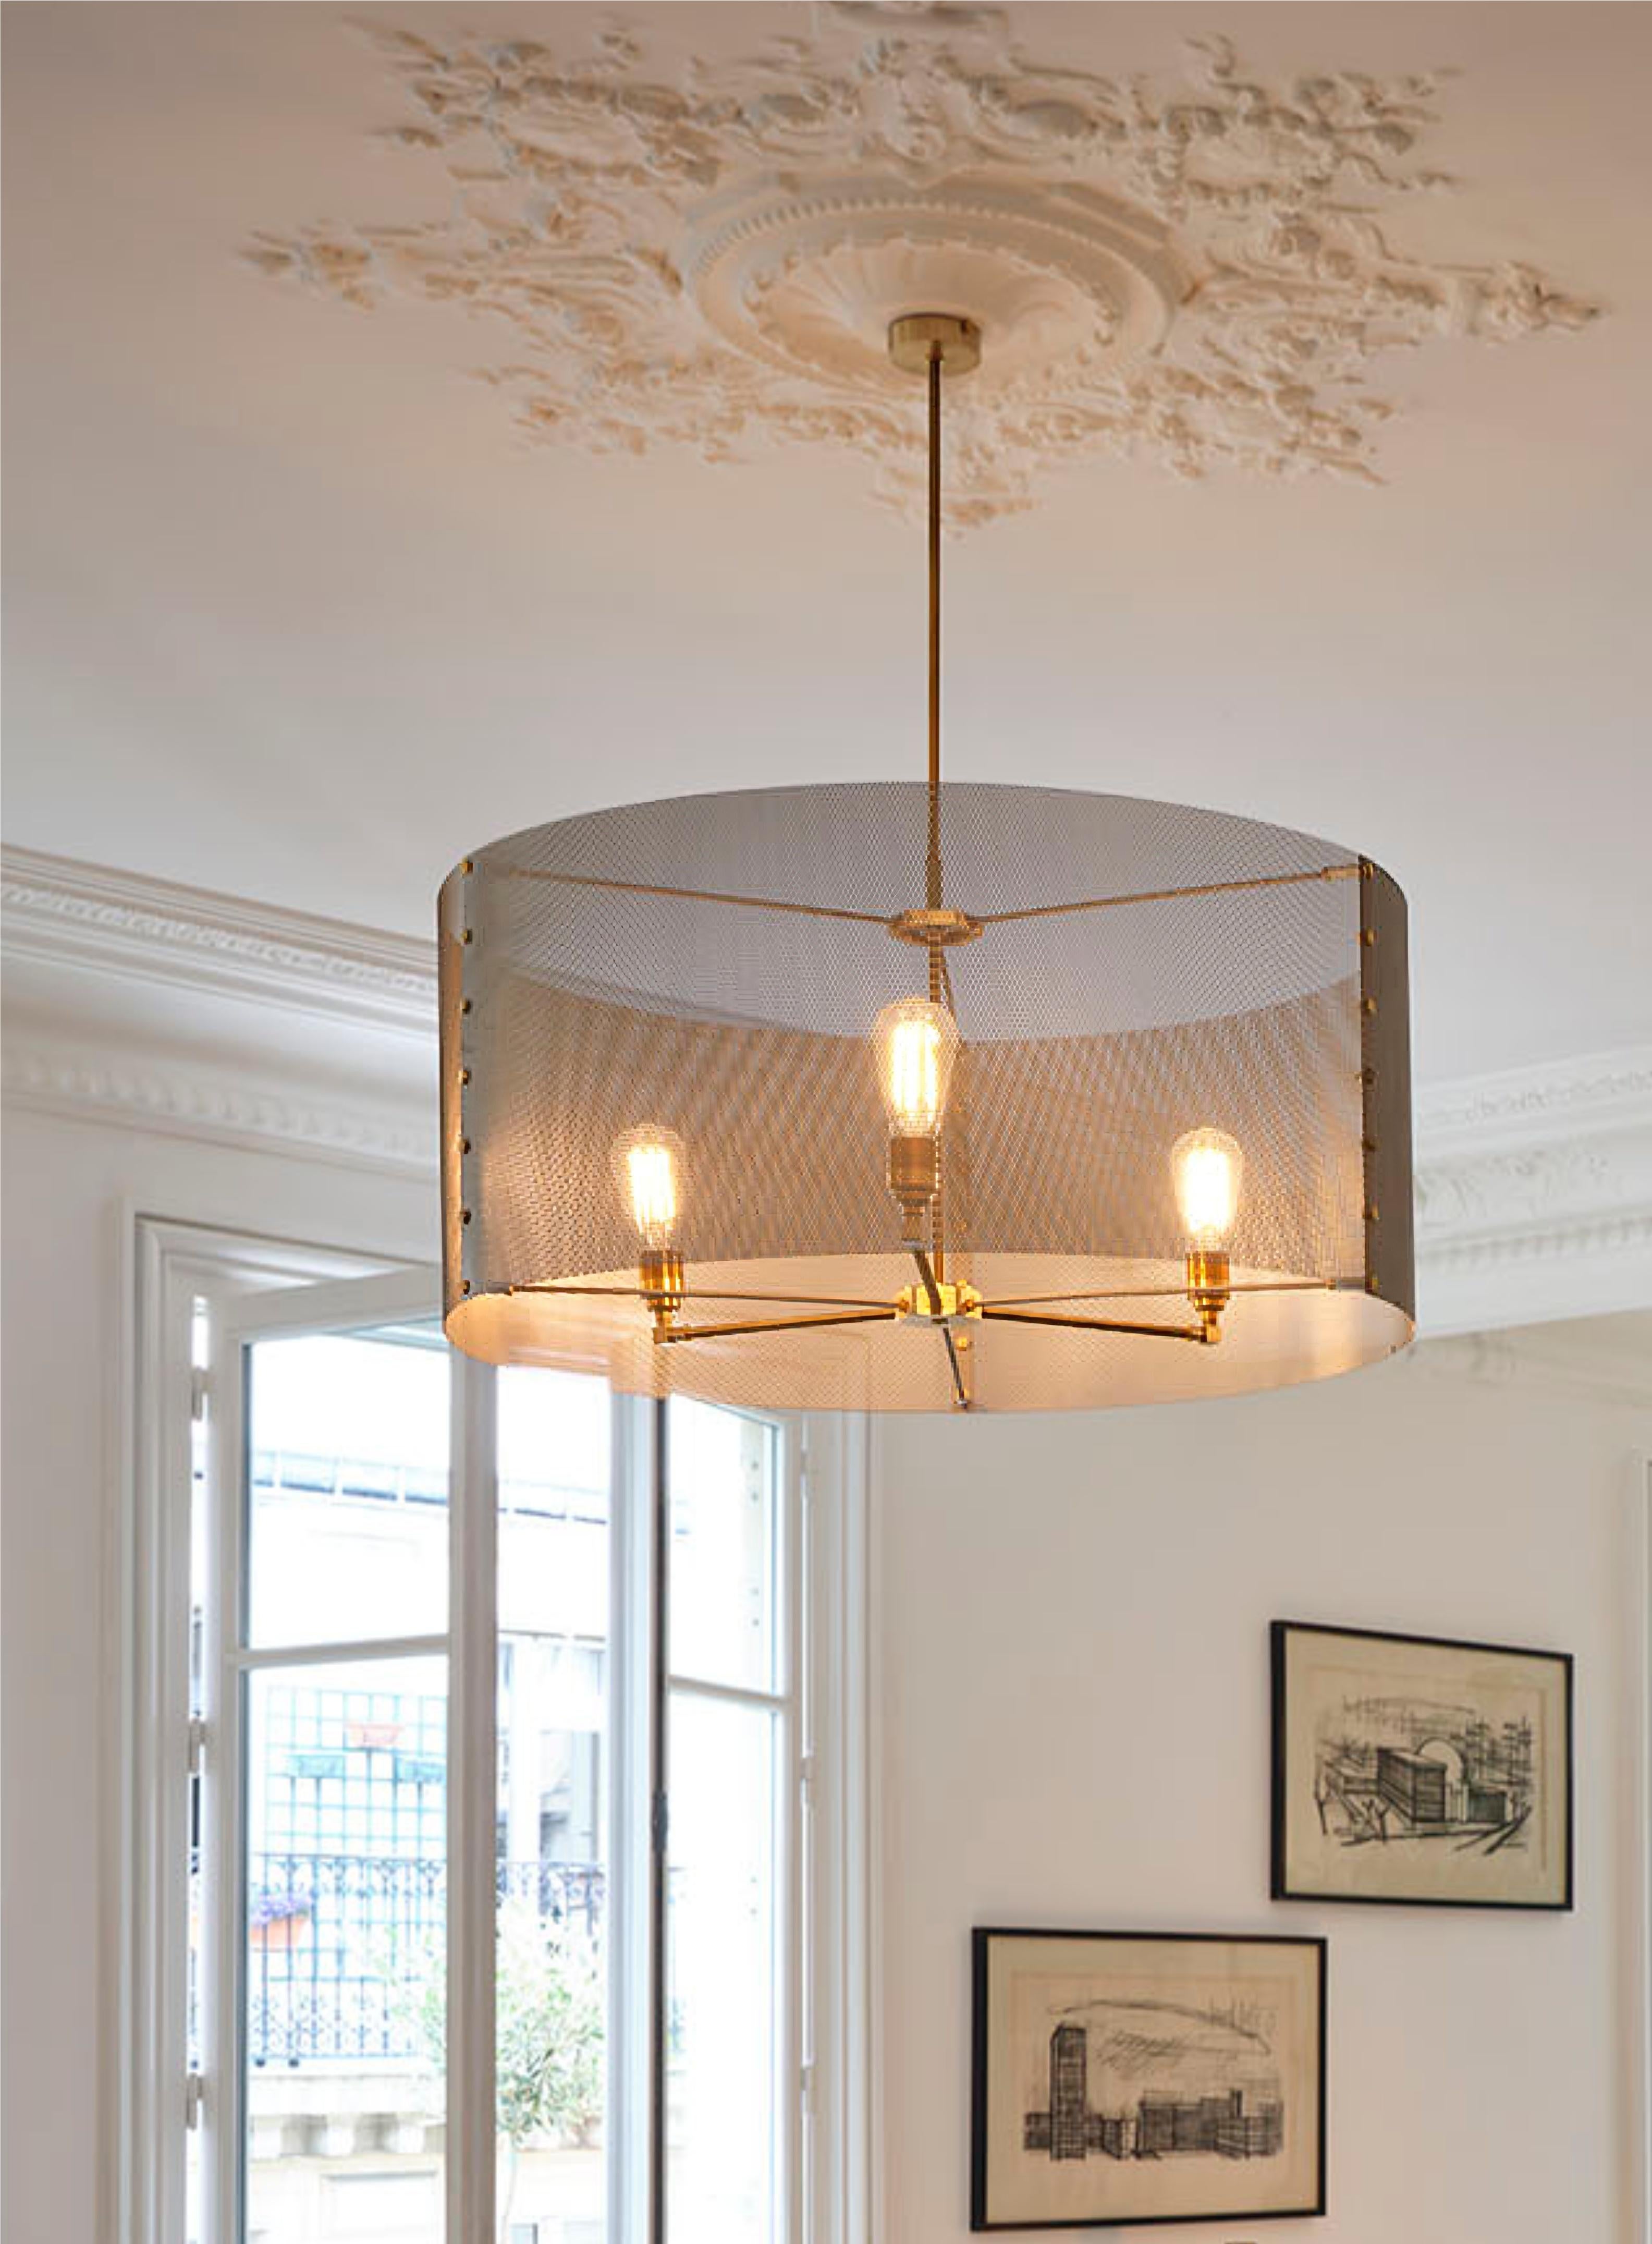 French 21st C Trapenard Pendant Lamp Brass Stainless Steel Shade by Marine Breynaert For Sale